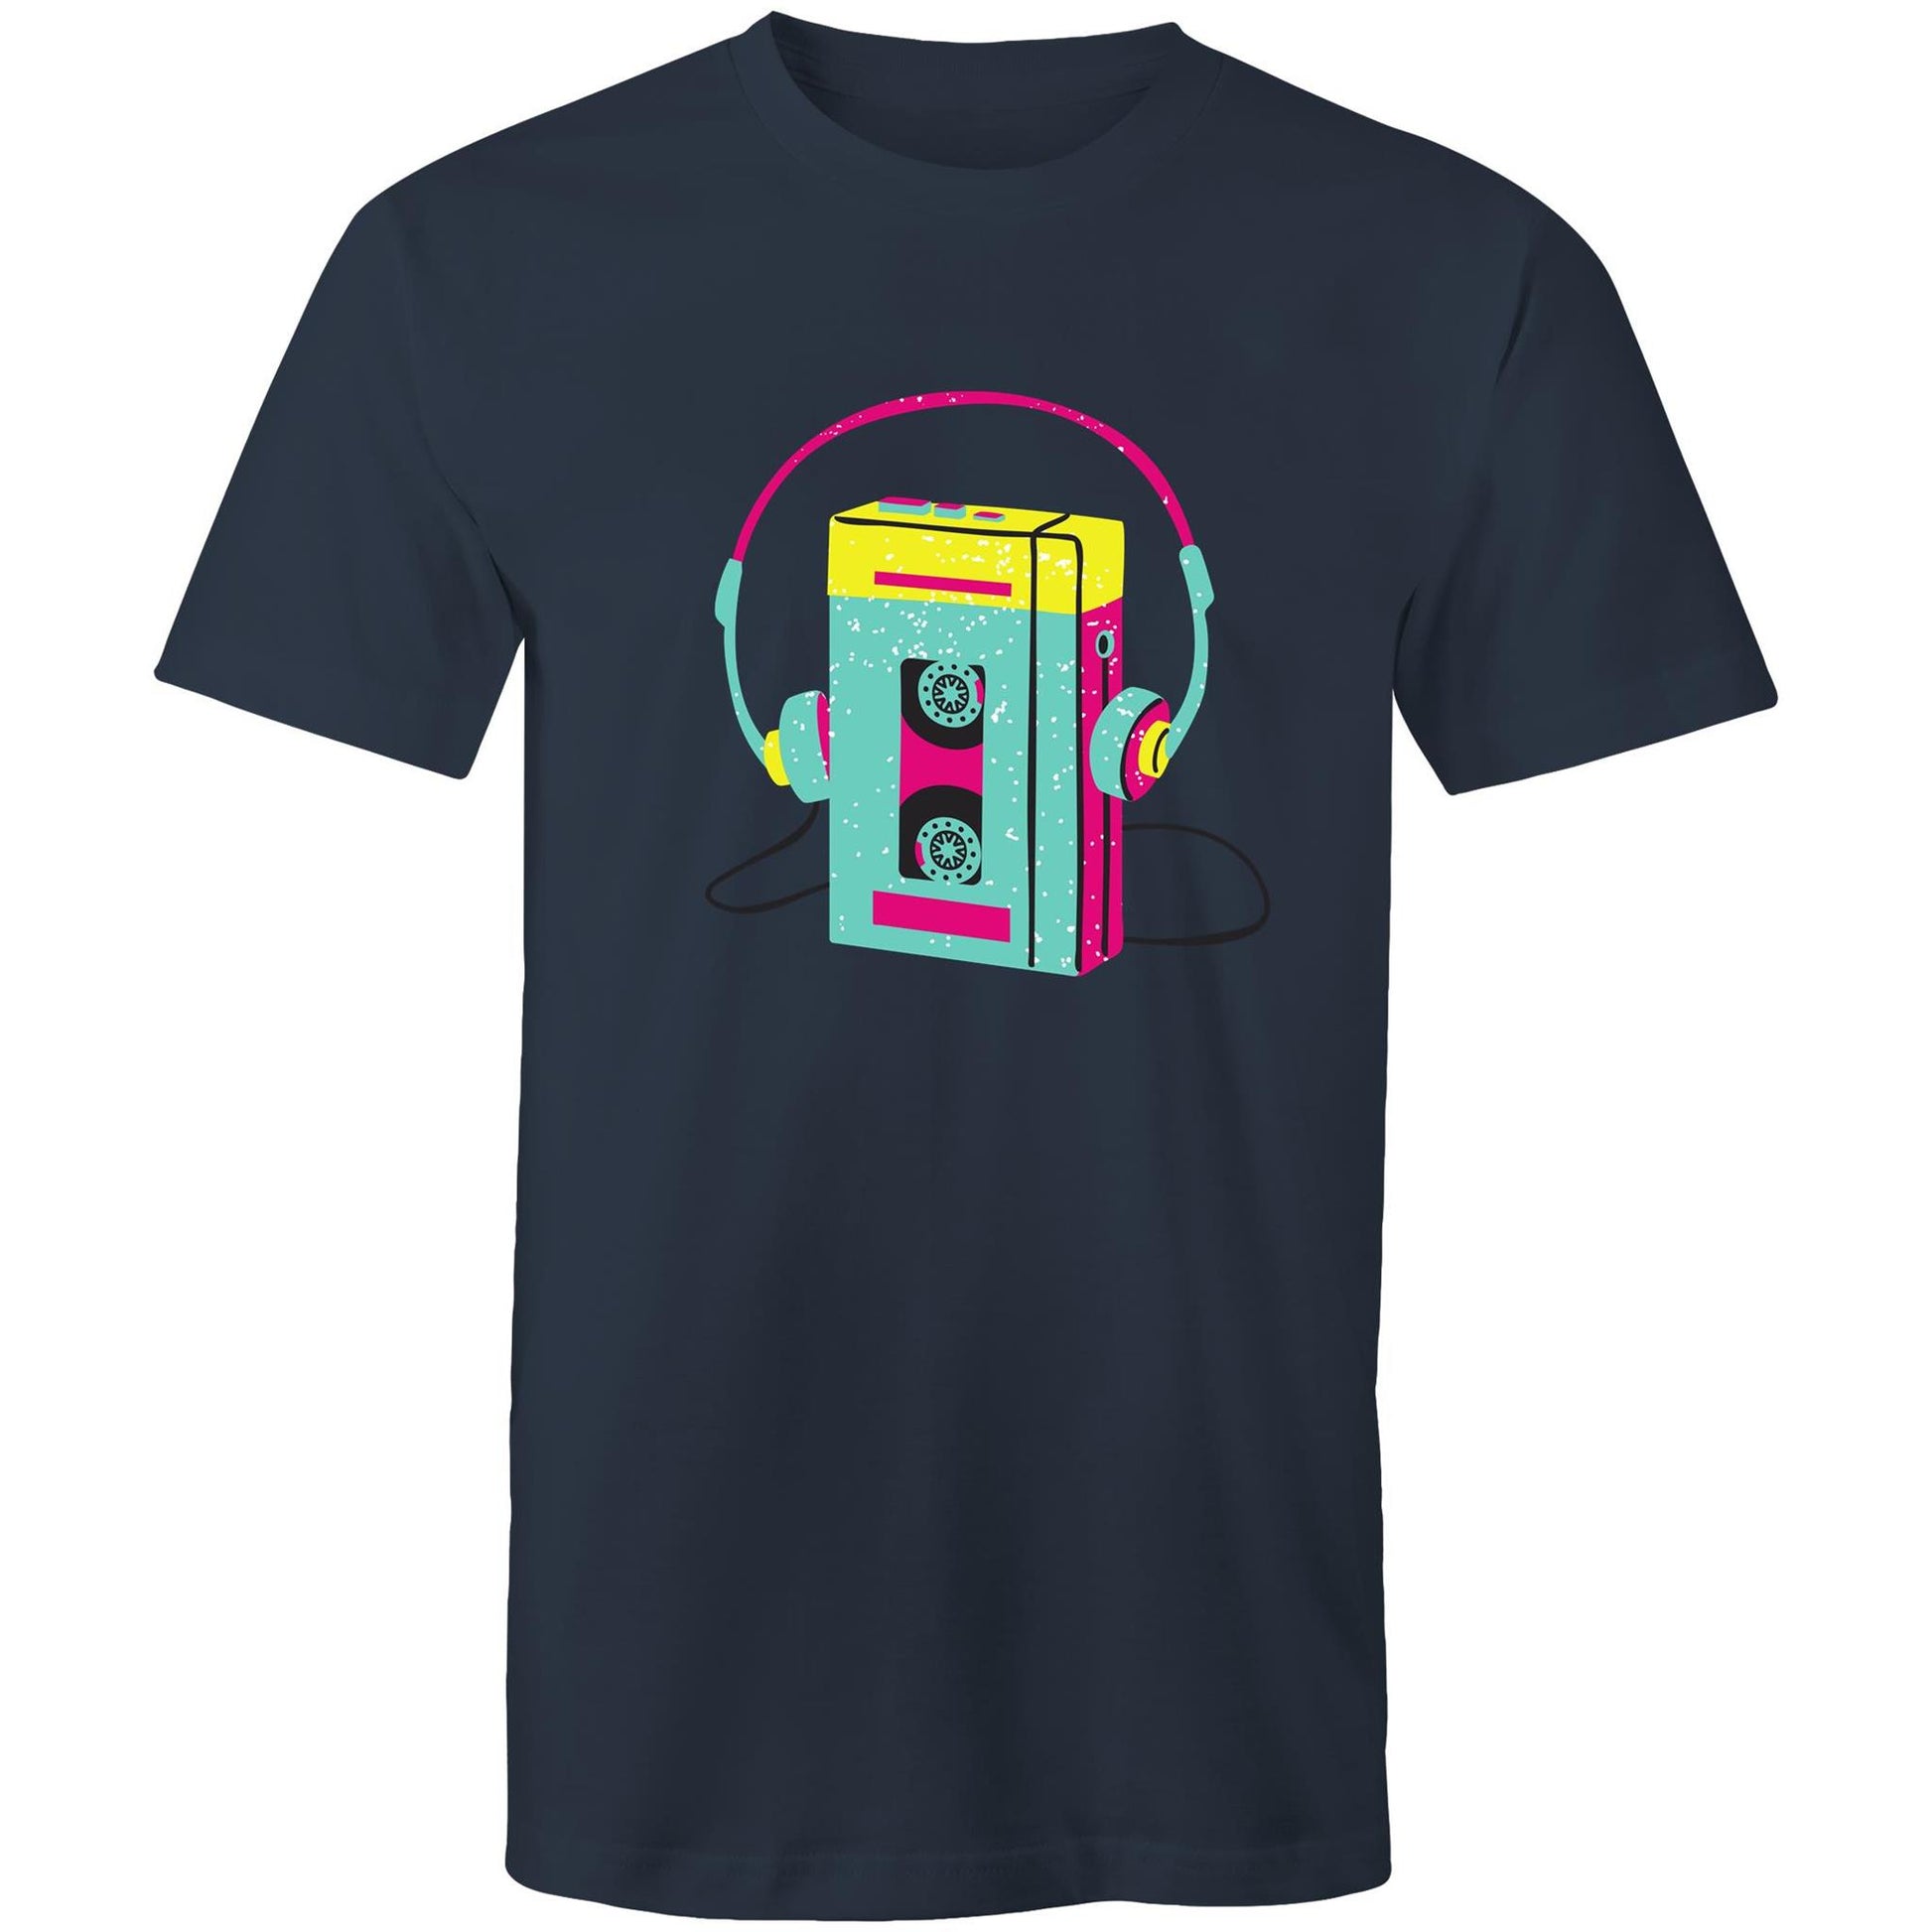 Wired For Sound, Music Player - Mens T-Shirt Navy Mens T-shirt Mens Music Retro